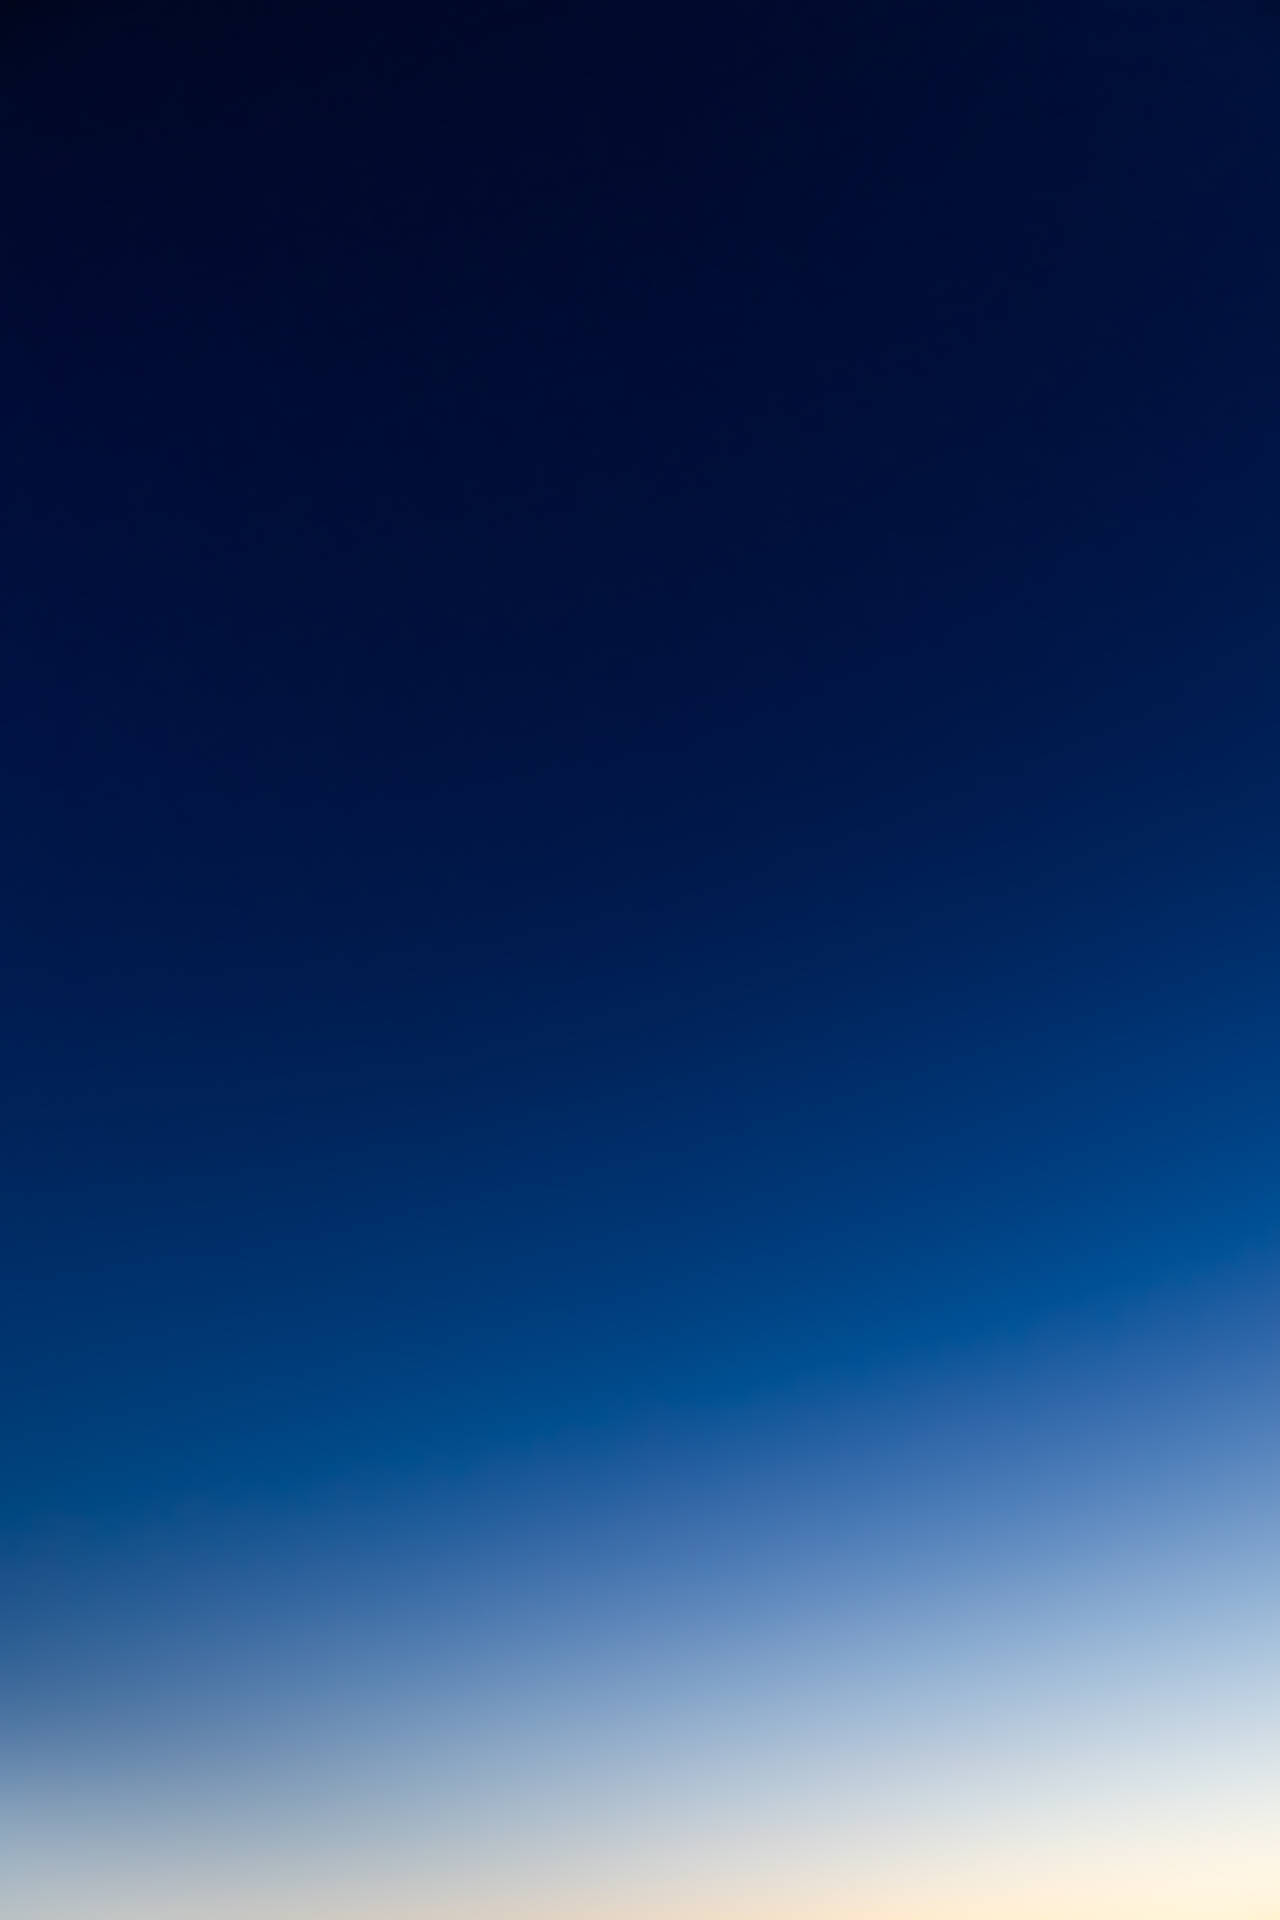 Dark Blue 4160X6240 Wallpaper and Background Image